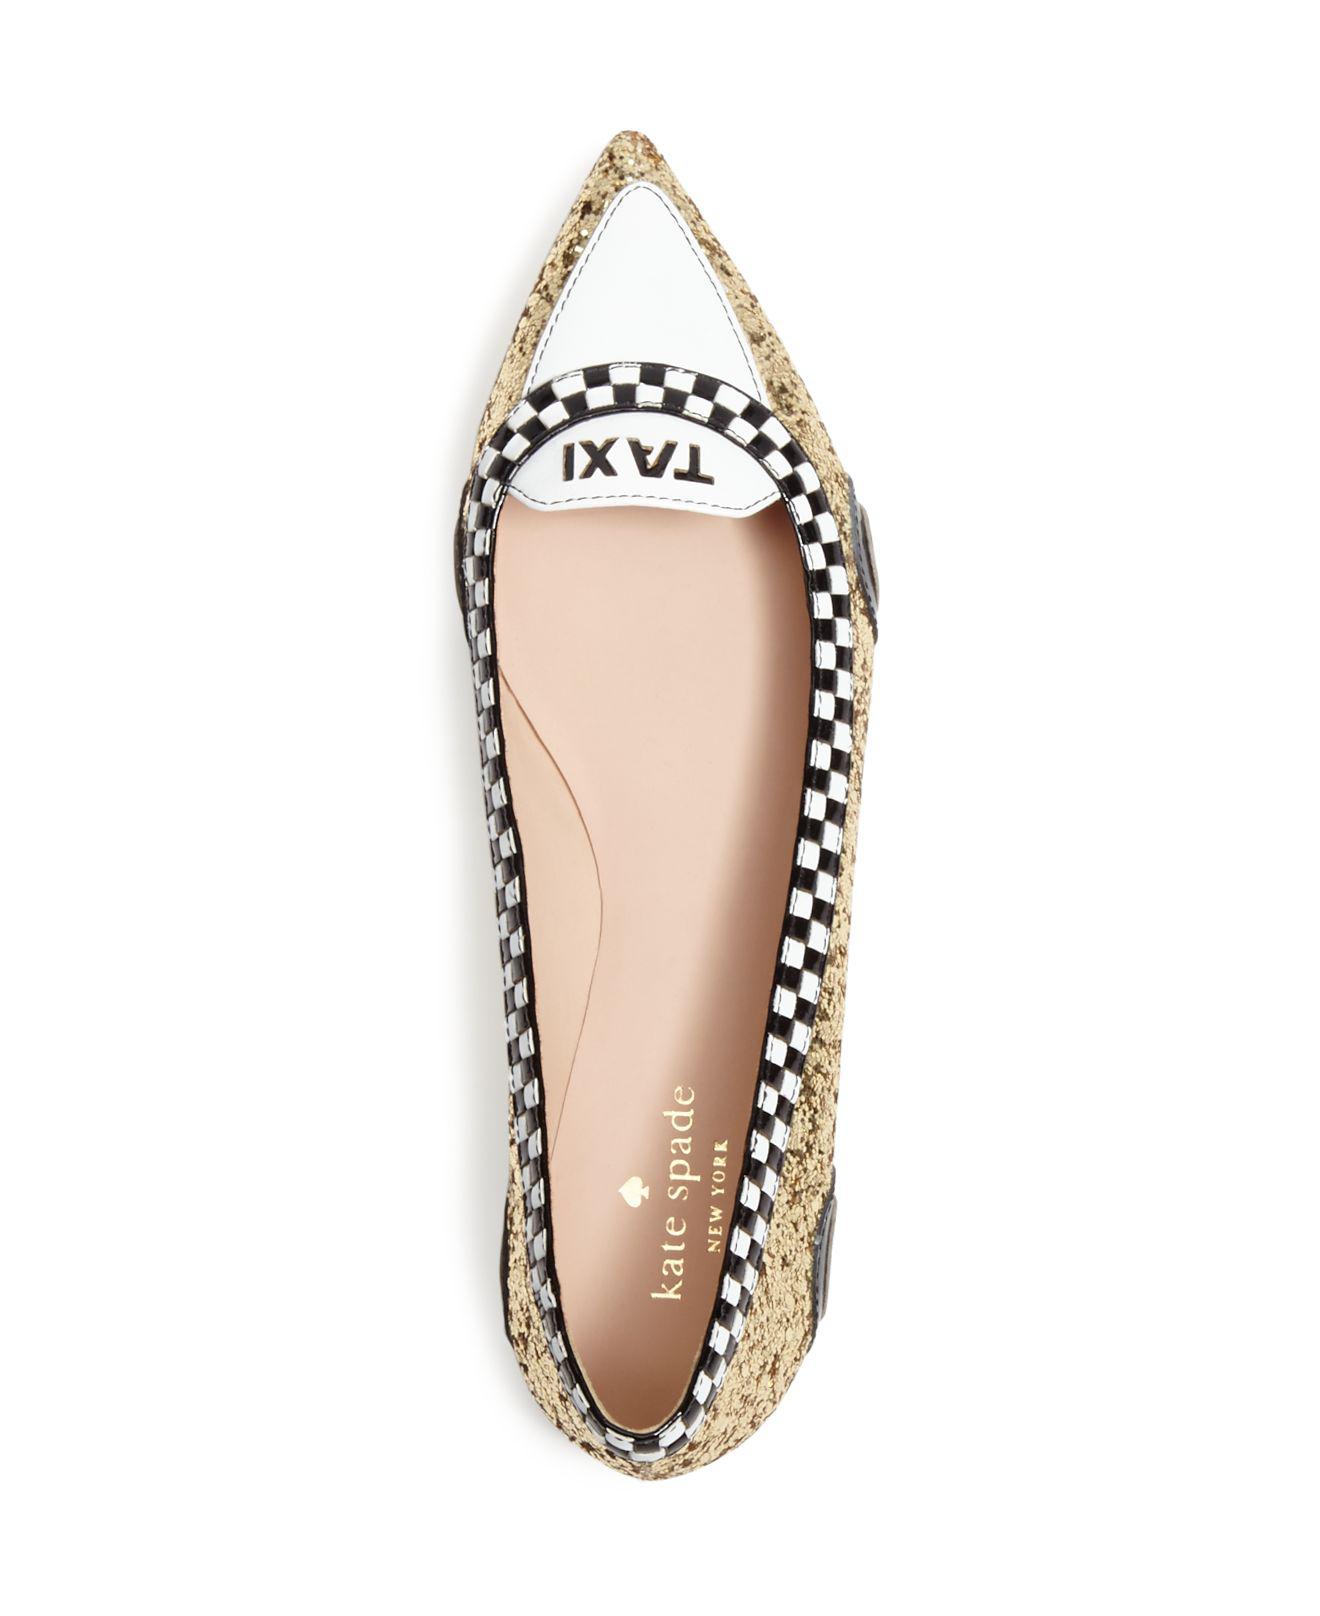 Kate Spade Leather Go Taxi Flats in Gold/Black/White (Metallic) - Lyst